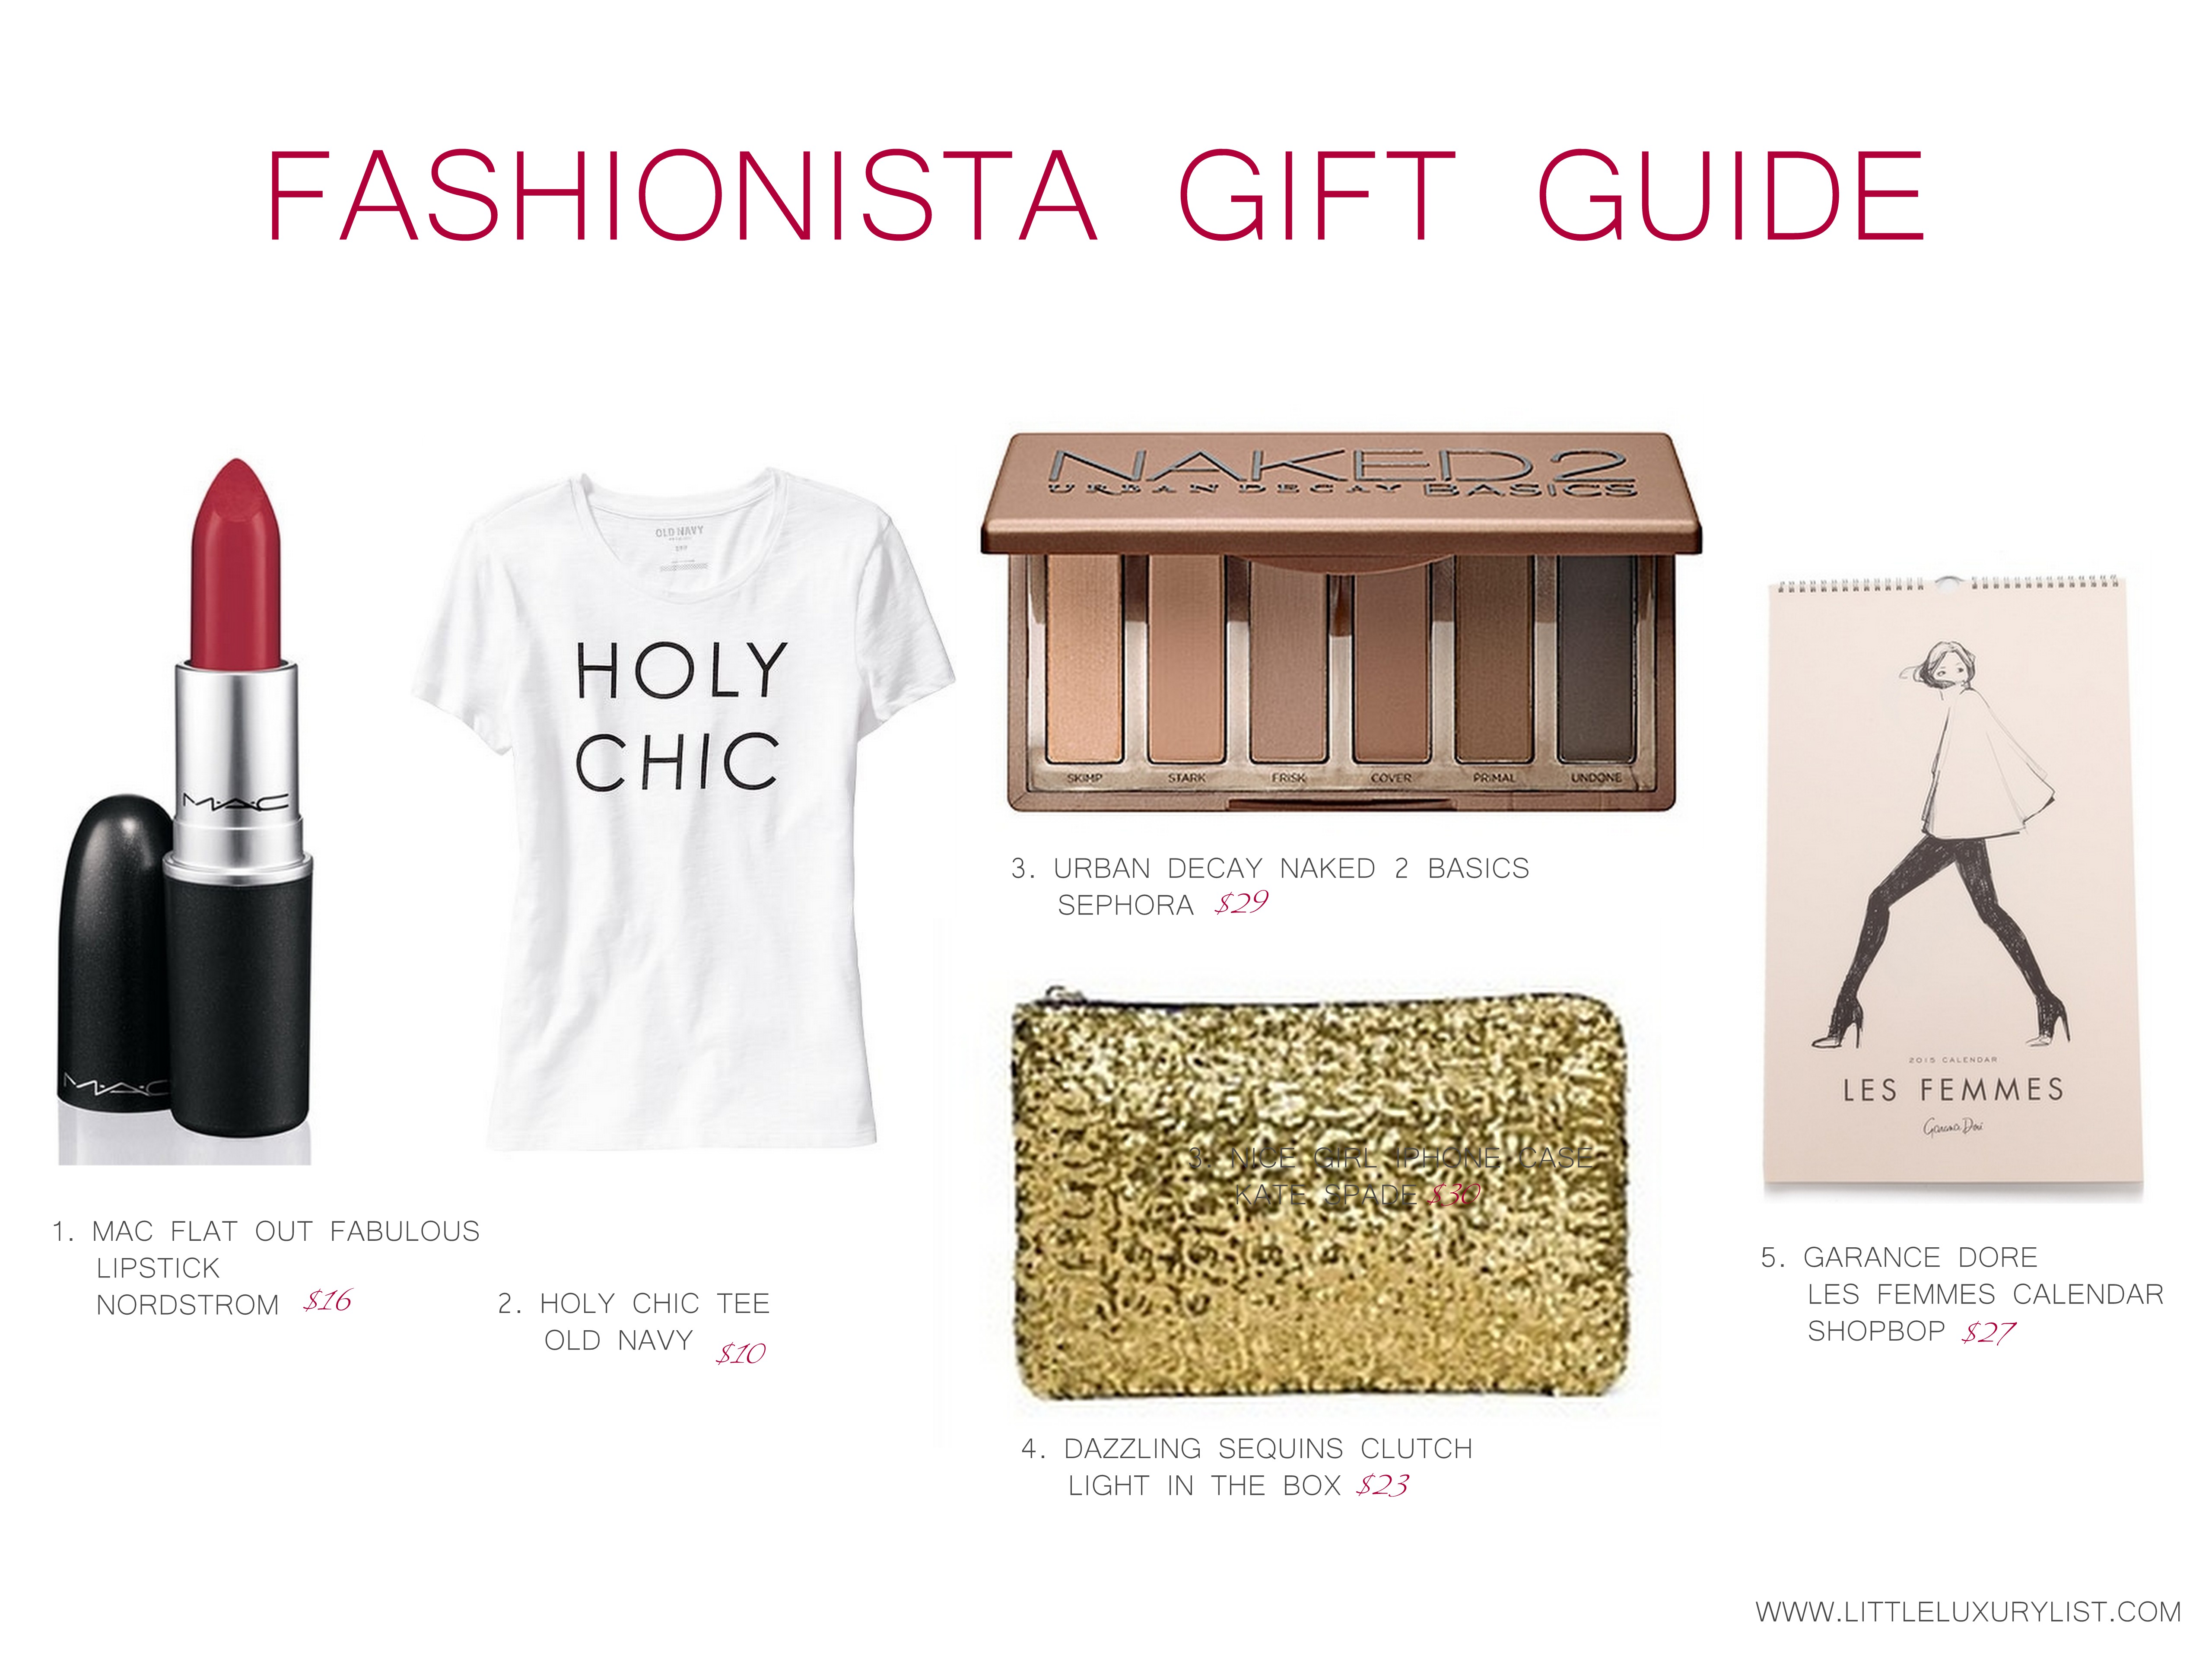 Fashionista Gift Guide part 2 by little luxury list